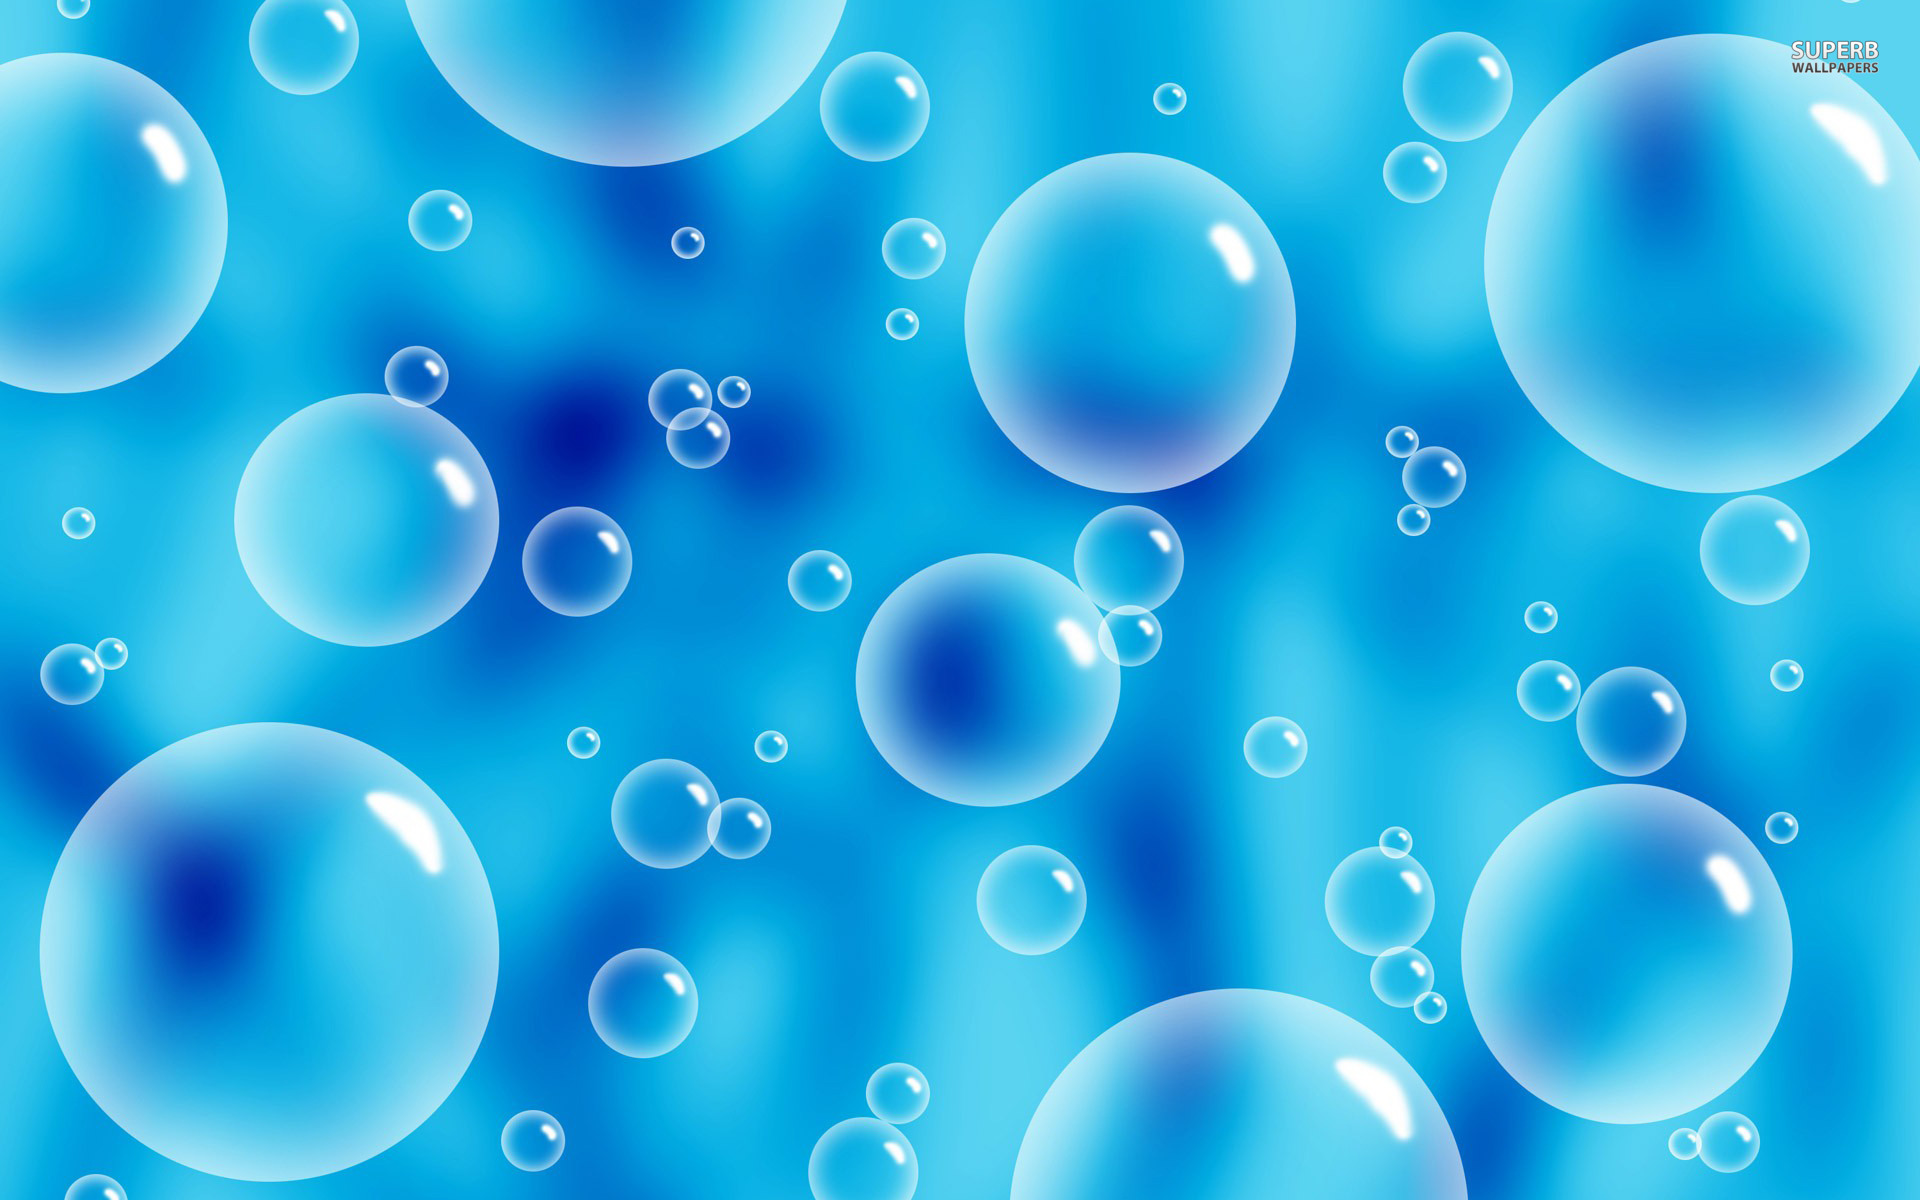 Bubbles wallpapers